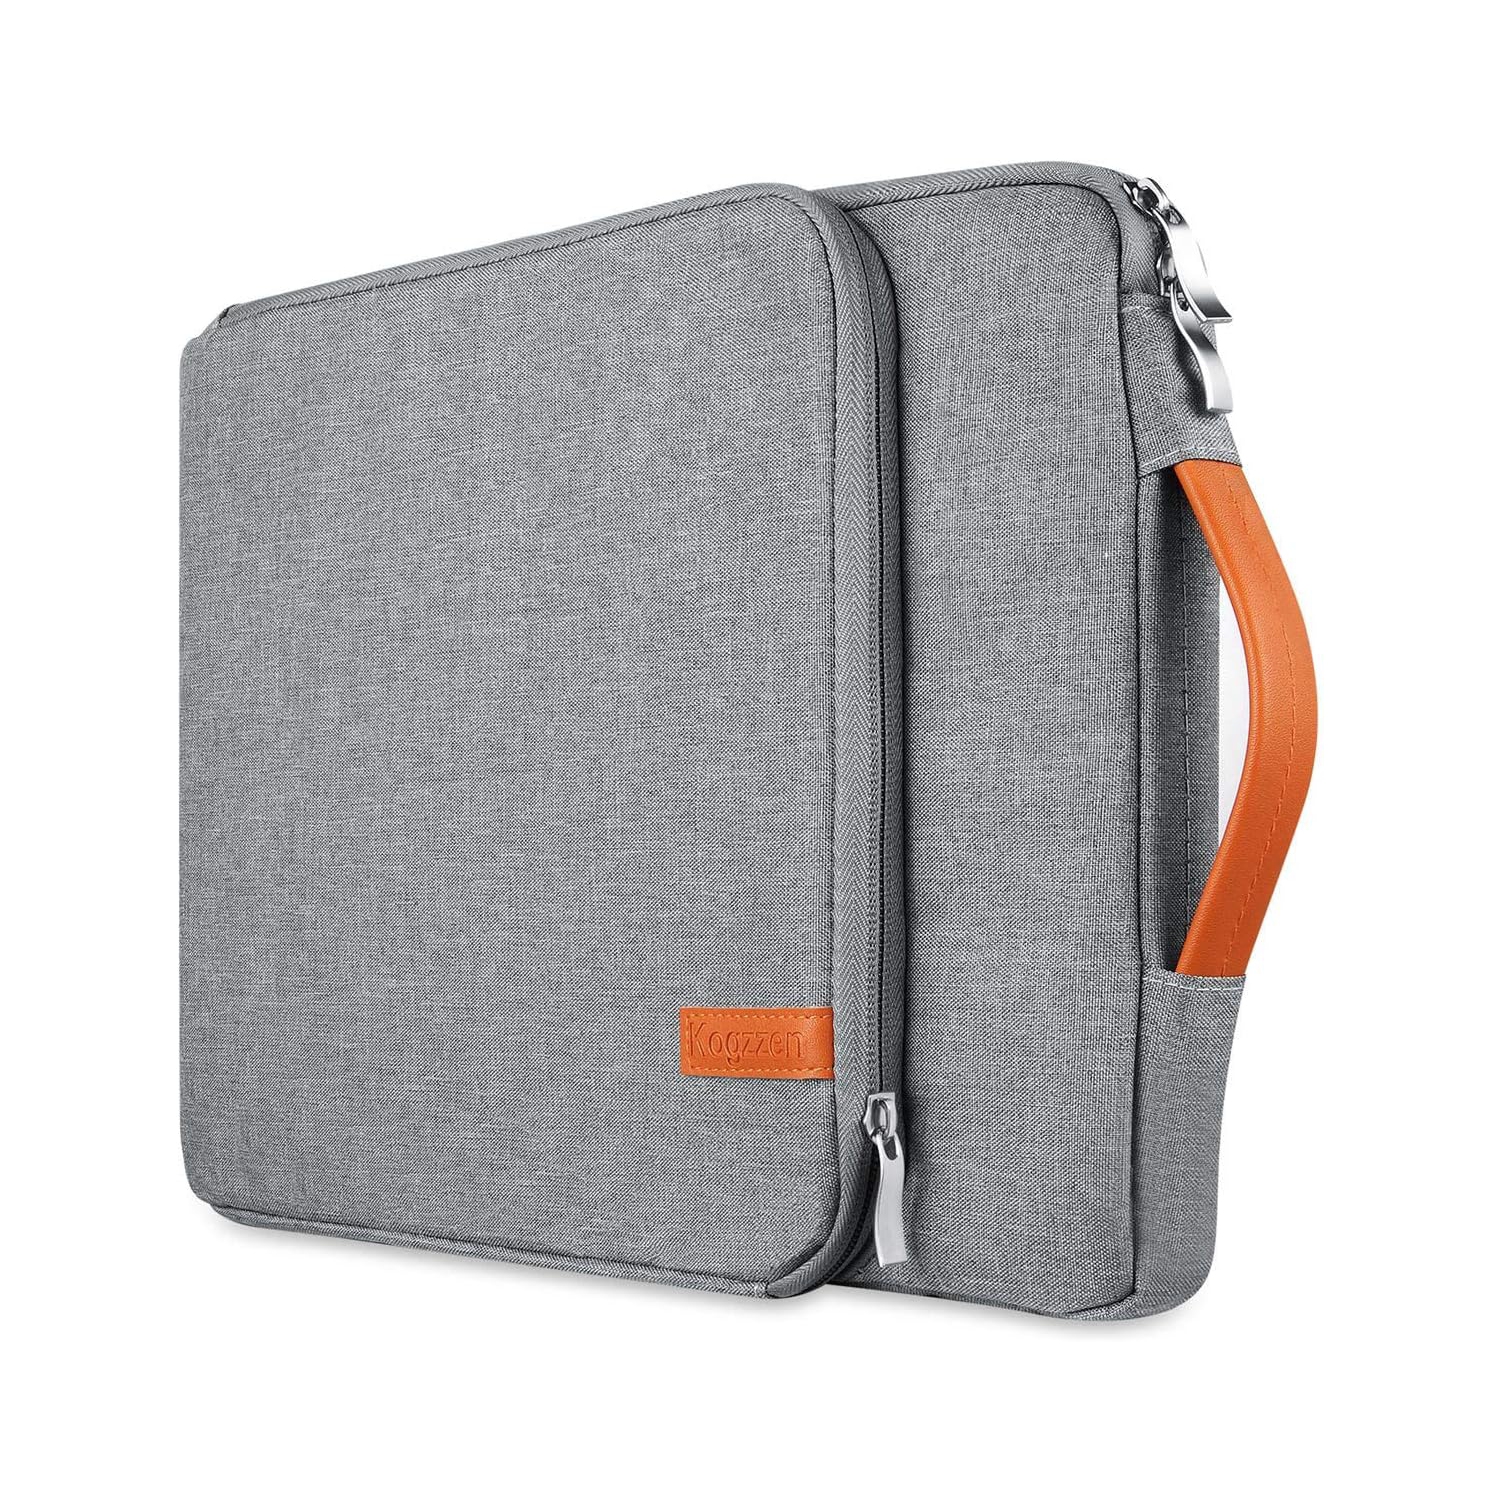 15-16 Inch Laptop Sleeve Waterproof Shockproof Case Notebook Bag Compatible with MacBook Pro 16/15/ Surface